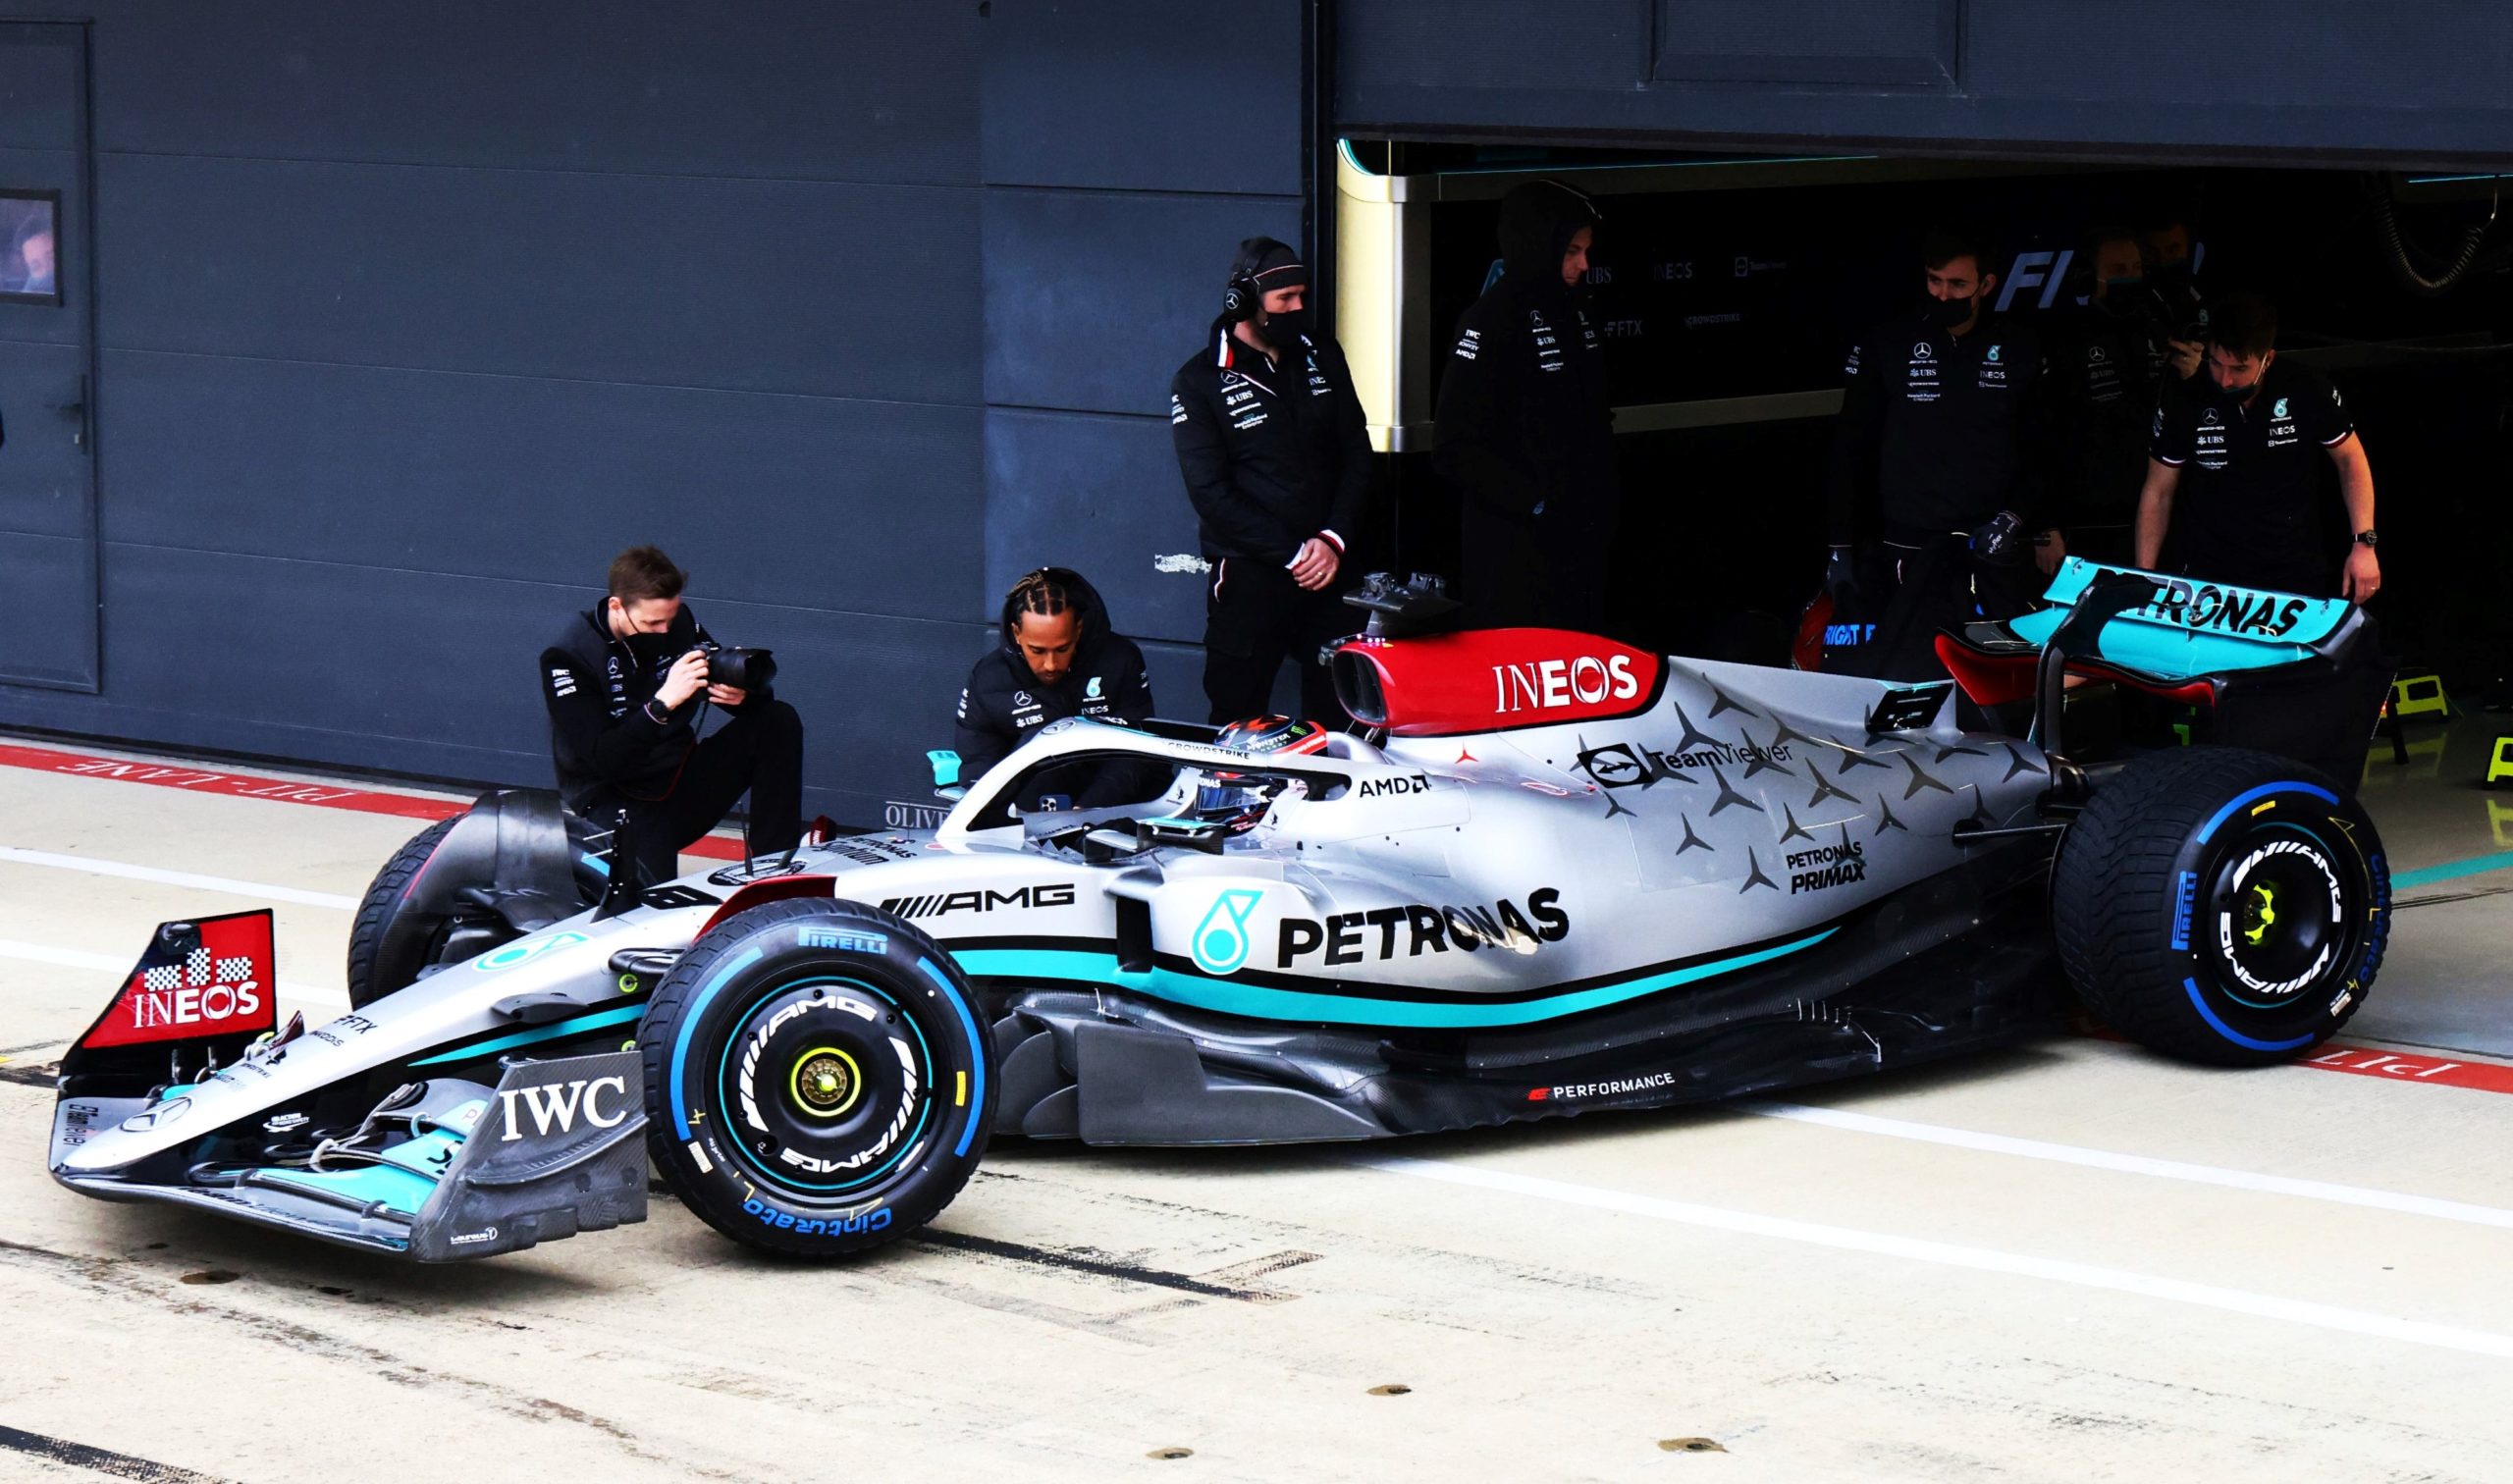 Mercedes W13 sets out to the track briefly after launch